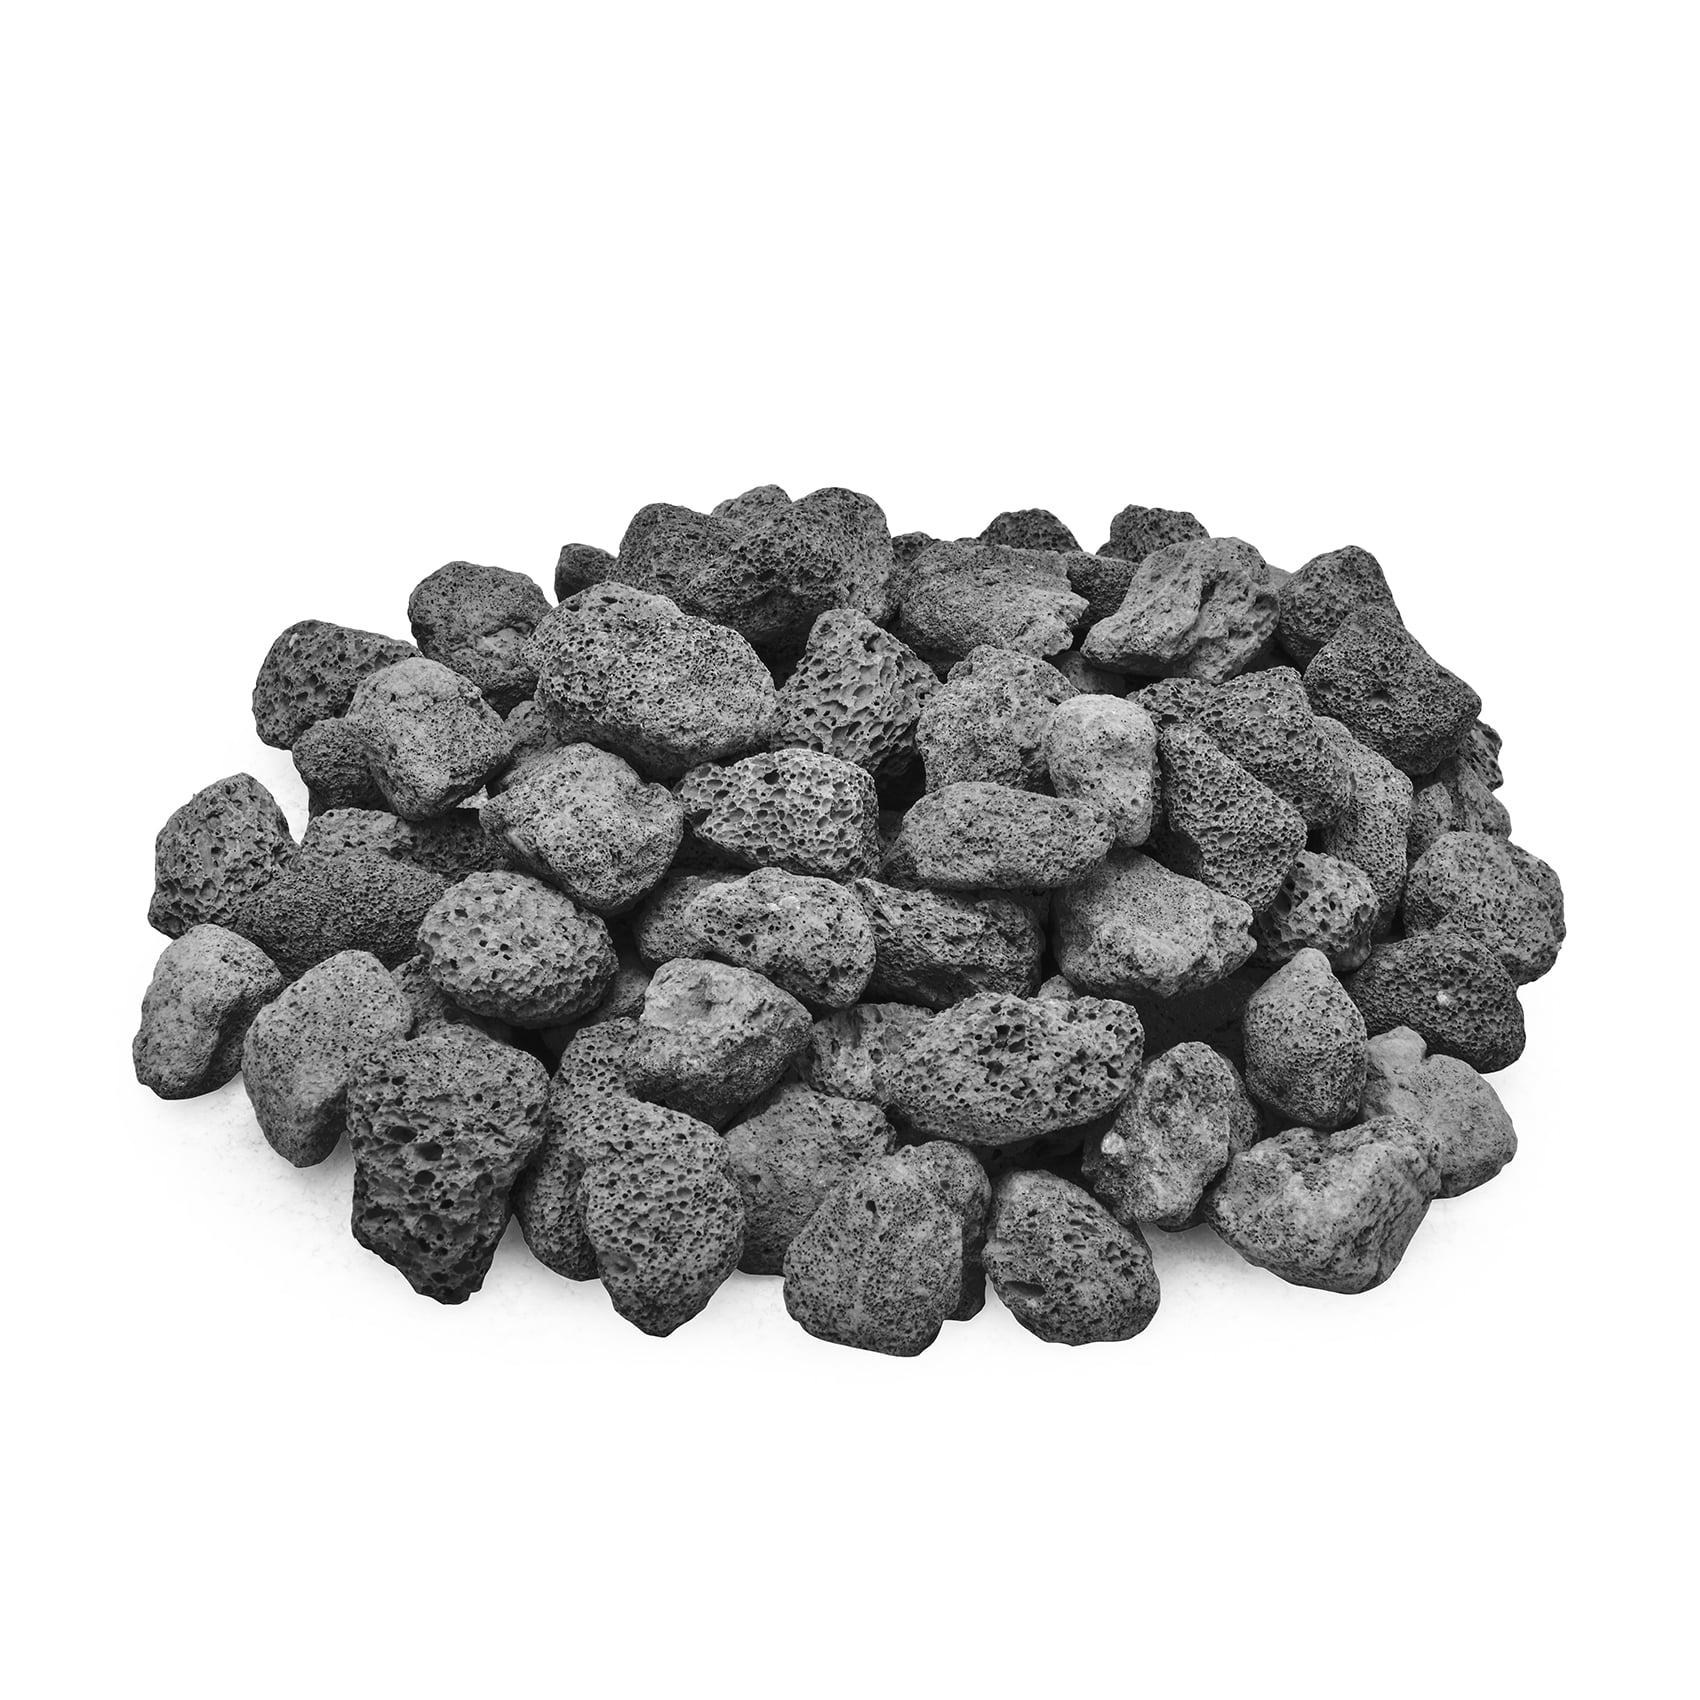 Fireplaces Fire Tables 1-2 Natural Sizes Garden Landscaping Decoration Indoor and Outdoor Use Skyflame 10LB Lava Rocks for Fire Pits Black 